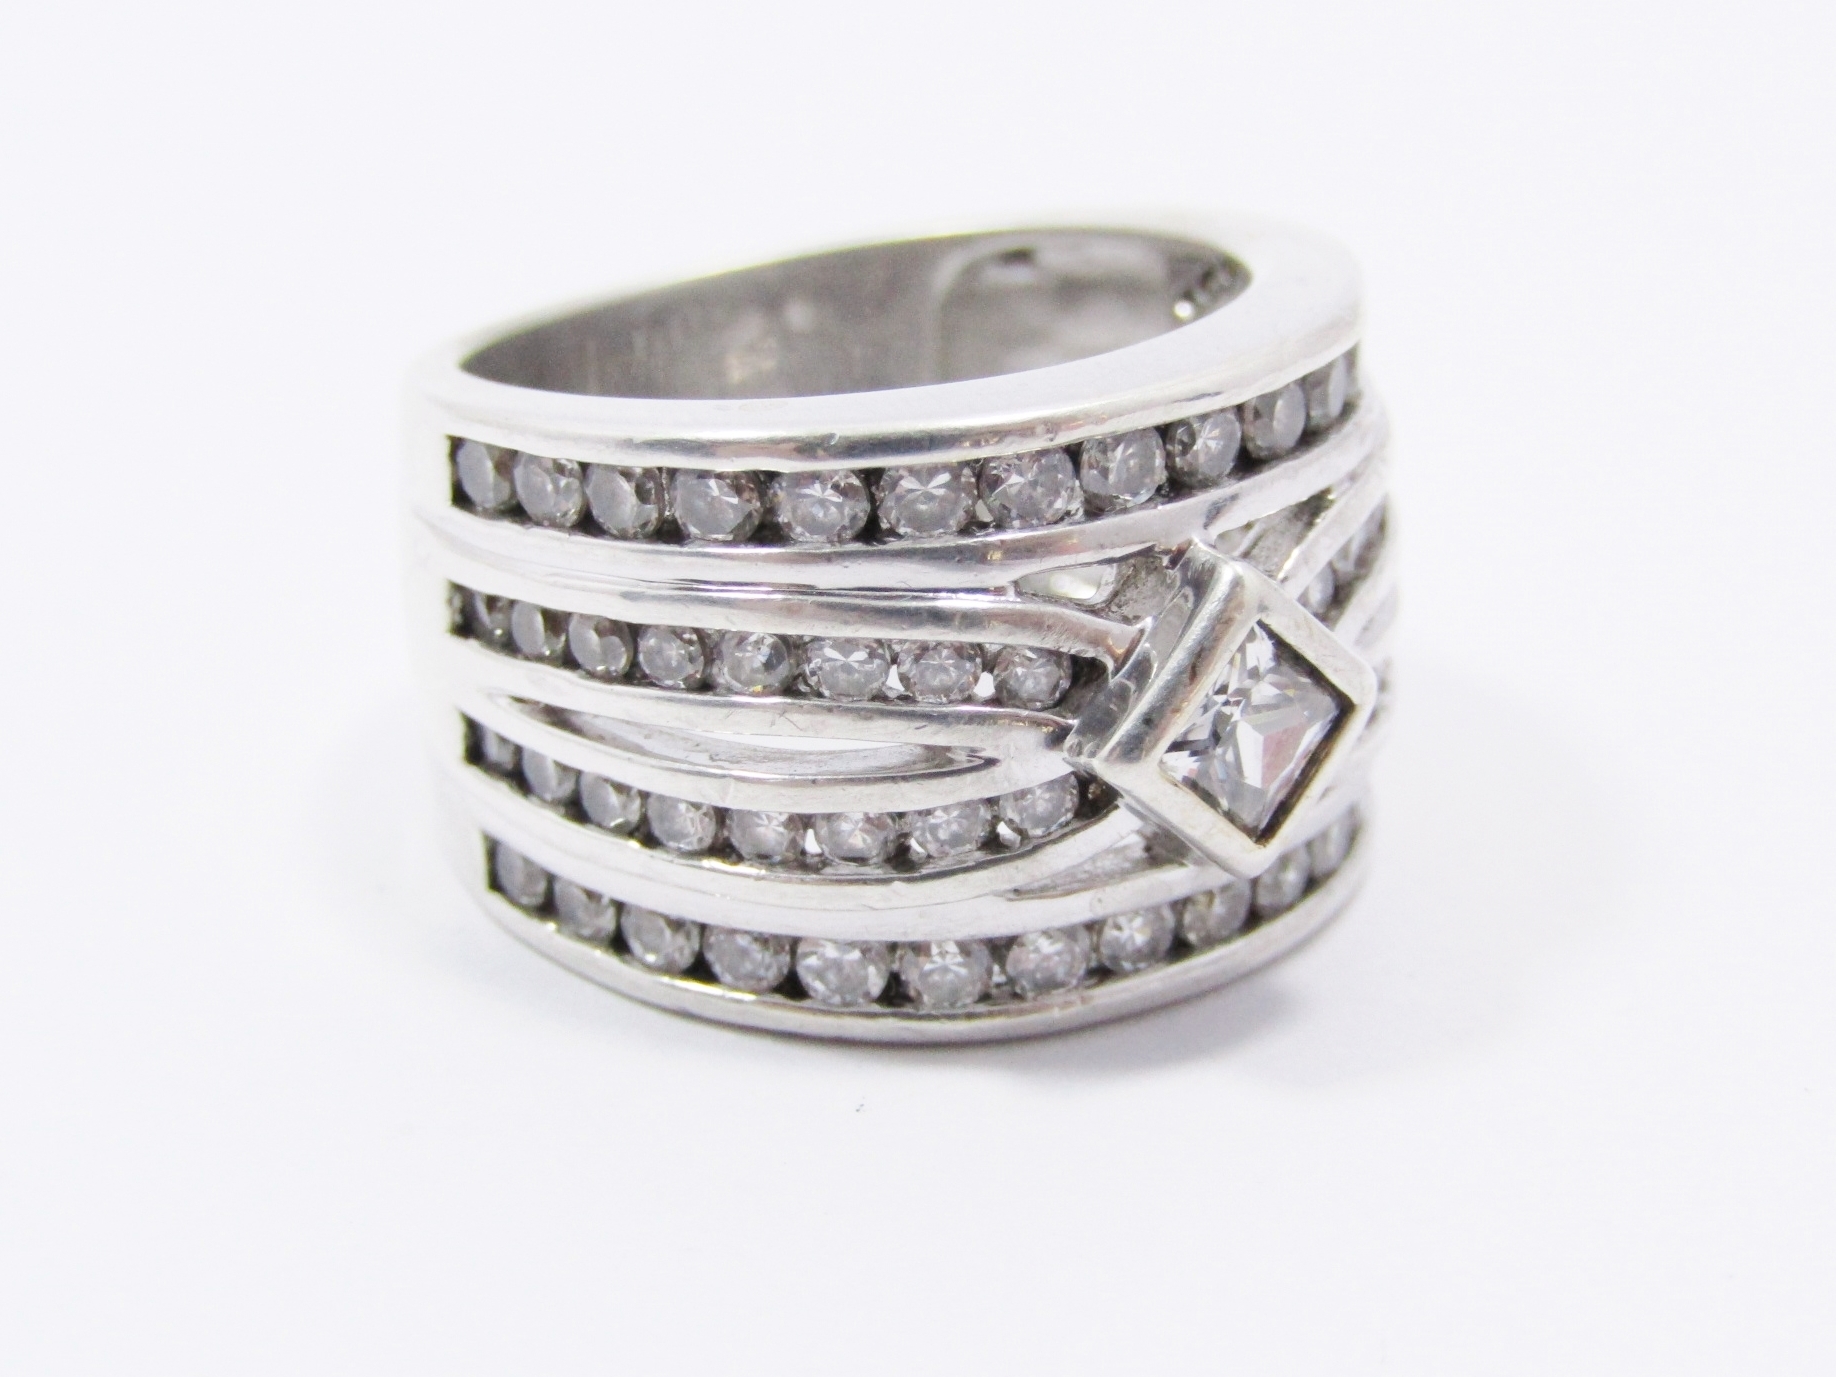 An Amazing Broad Four Band Into One Zirconia Ring in Sterling Silver.